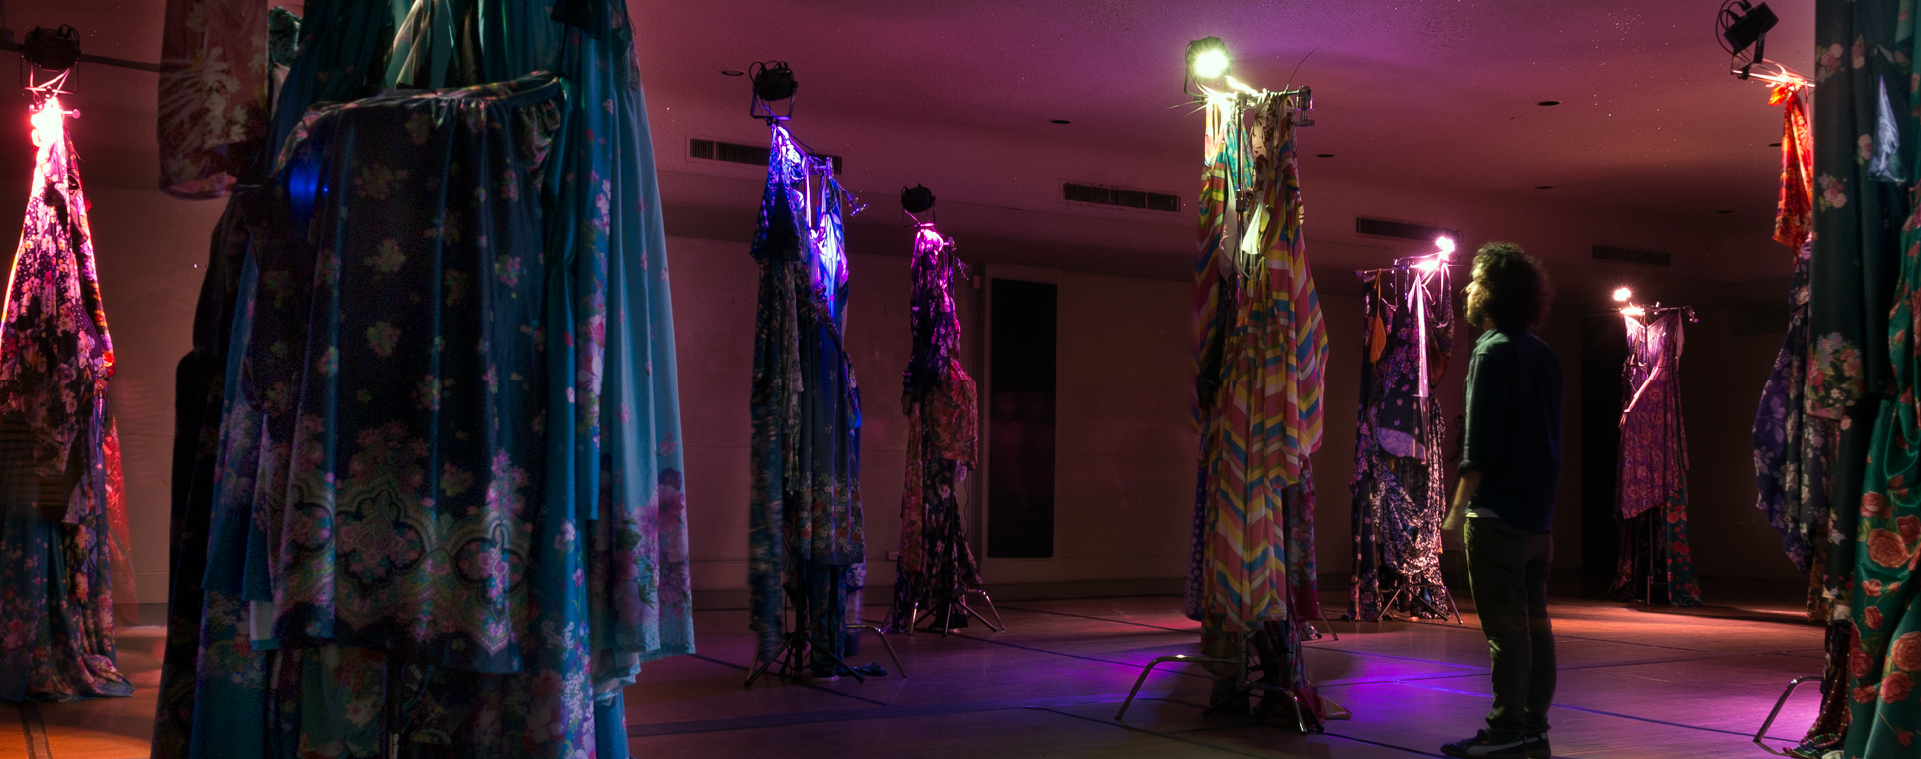 An art installation in a dimly lit room with patterned fabrics adorned on tall poles, each topped with a colored light; a person turned away from the camera stands in front of one.